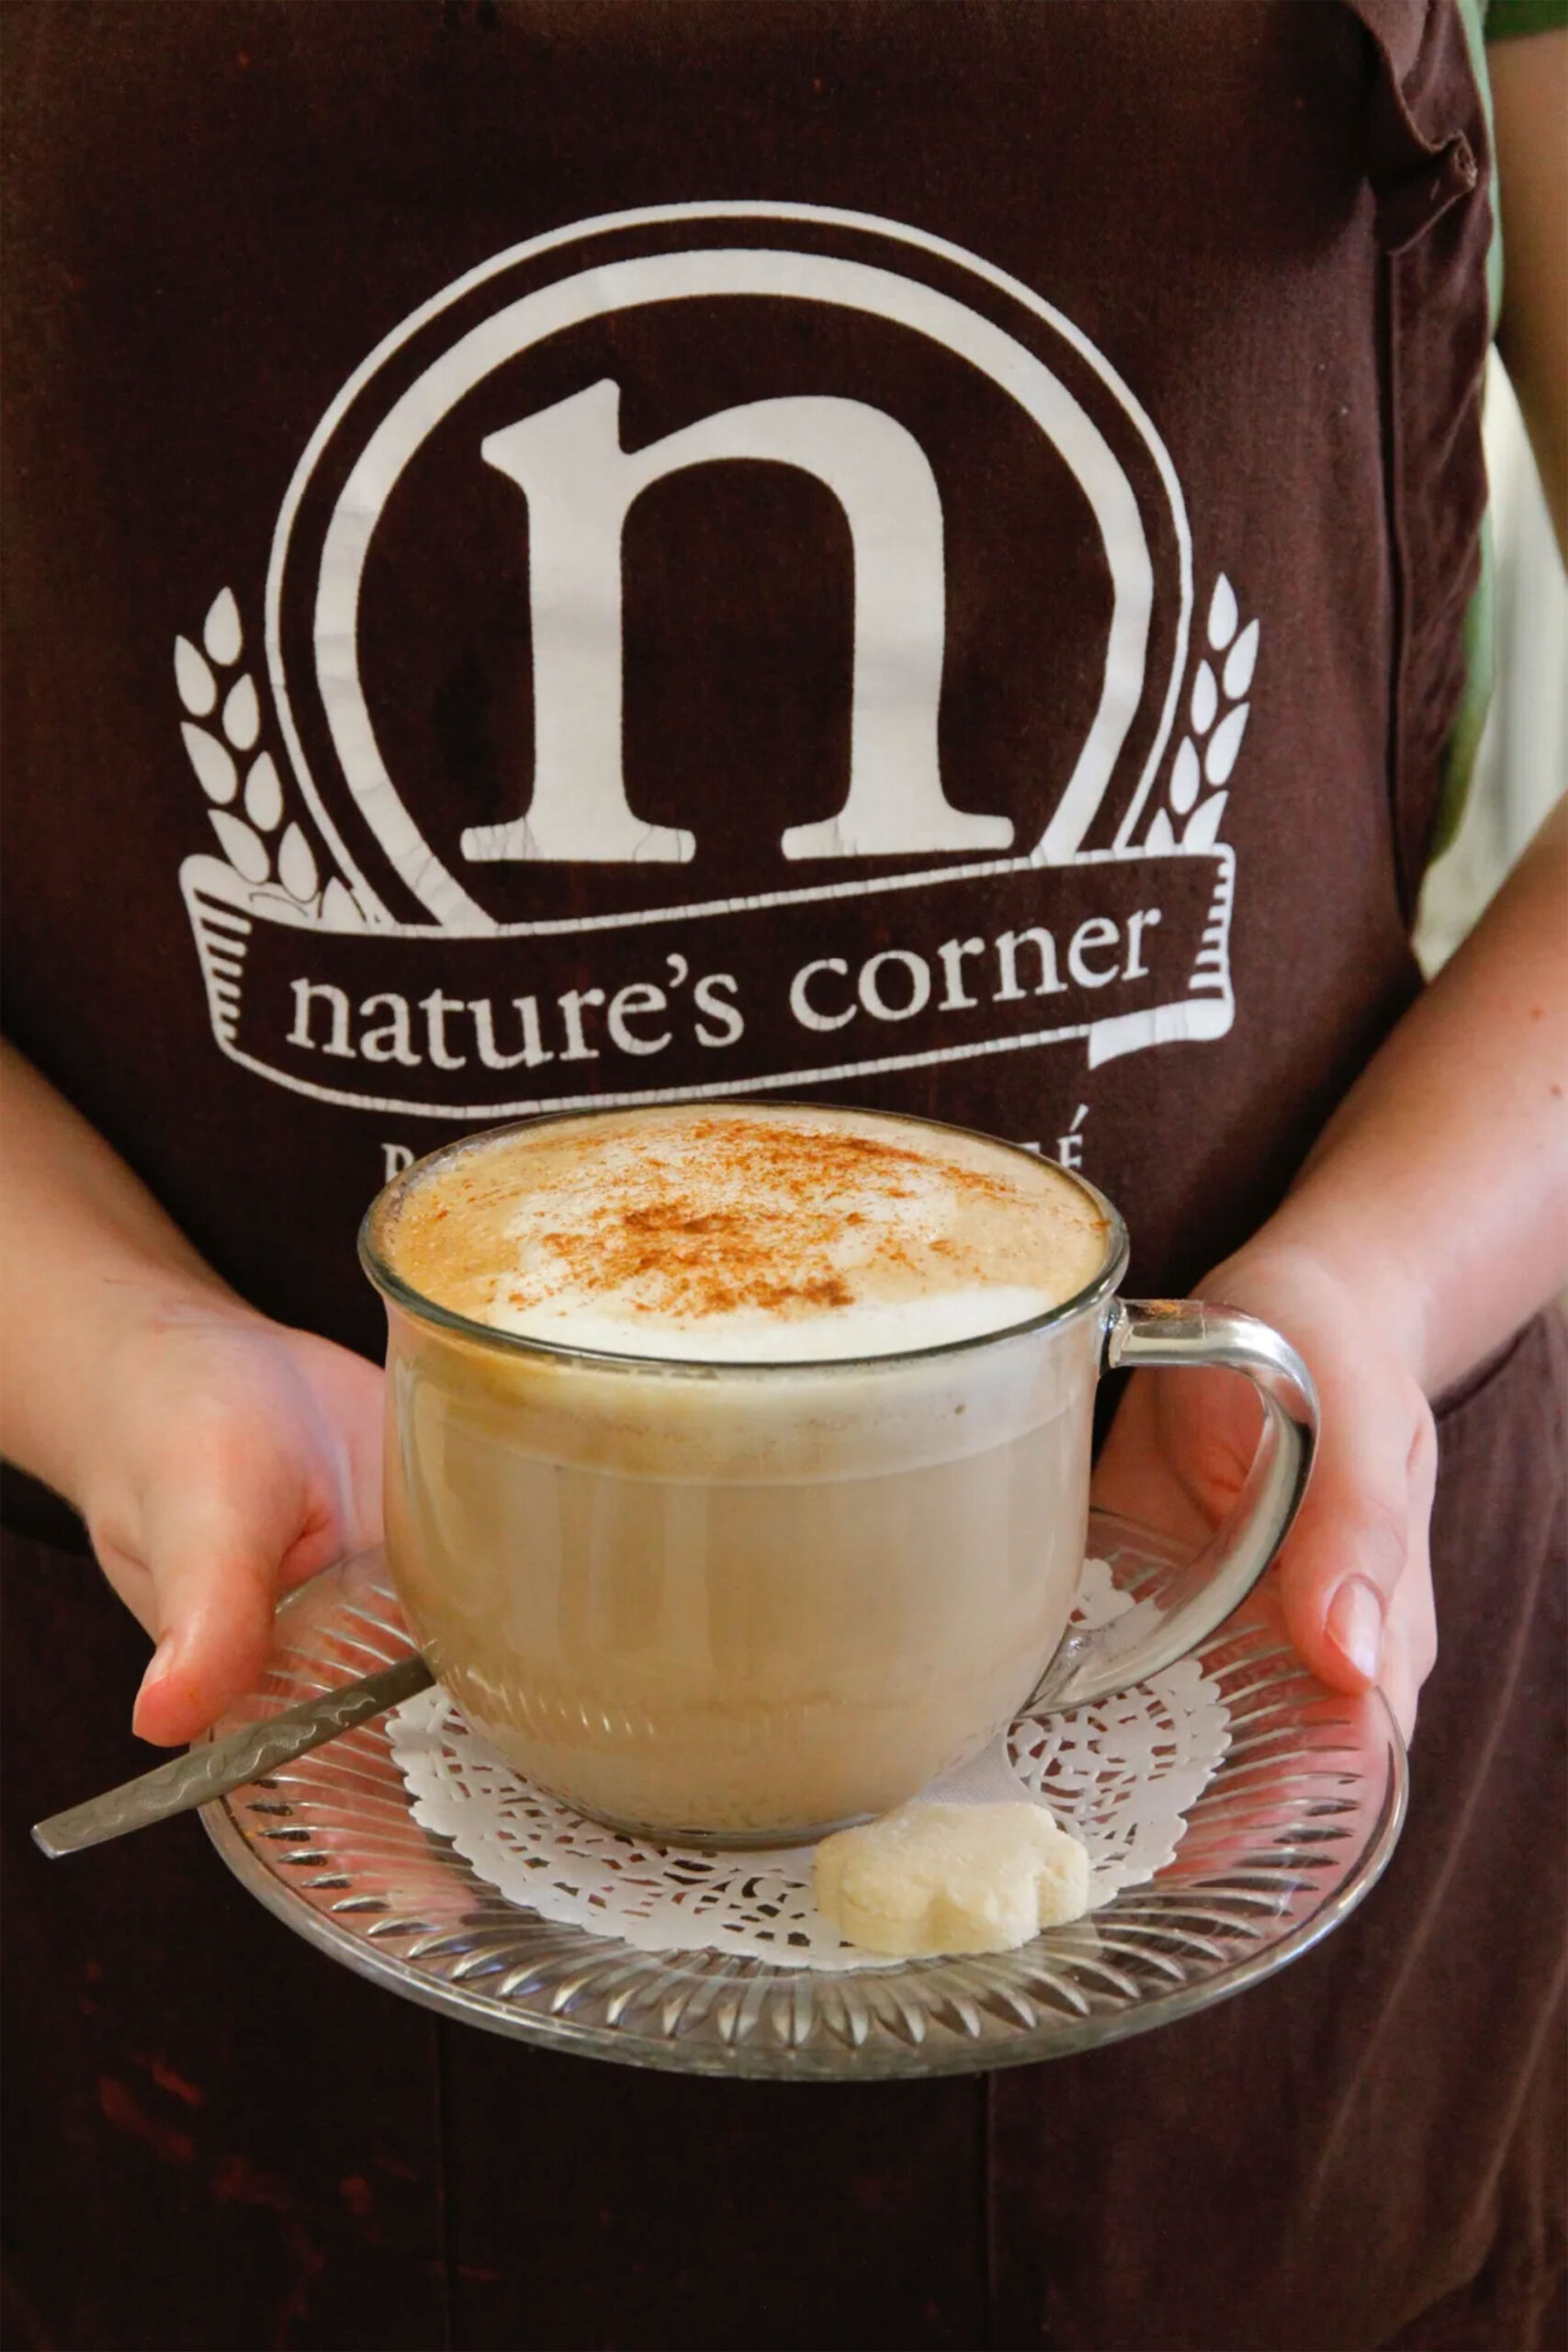 Organic fair trade coffee is just one of the sustainable options at Nature's Corner.